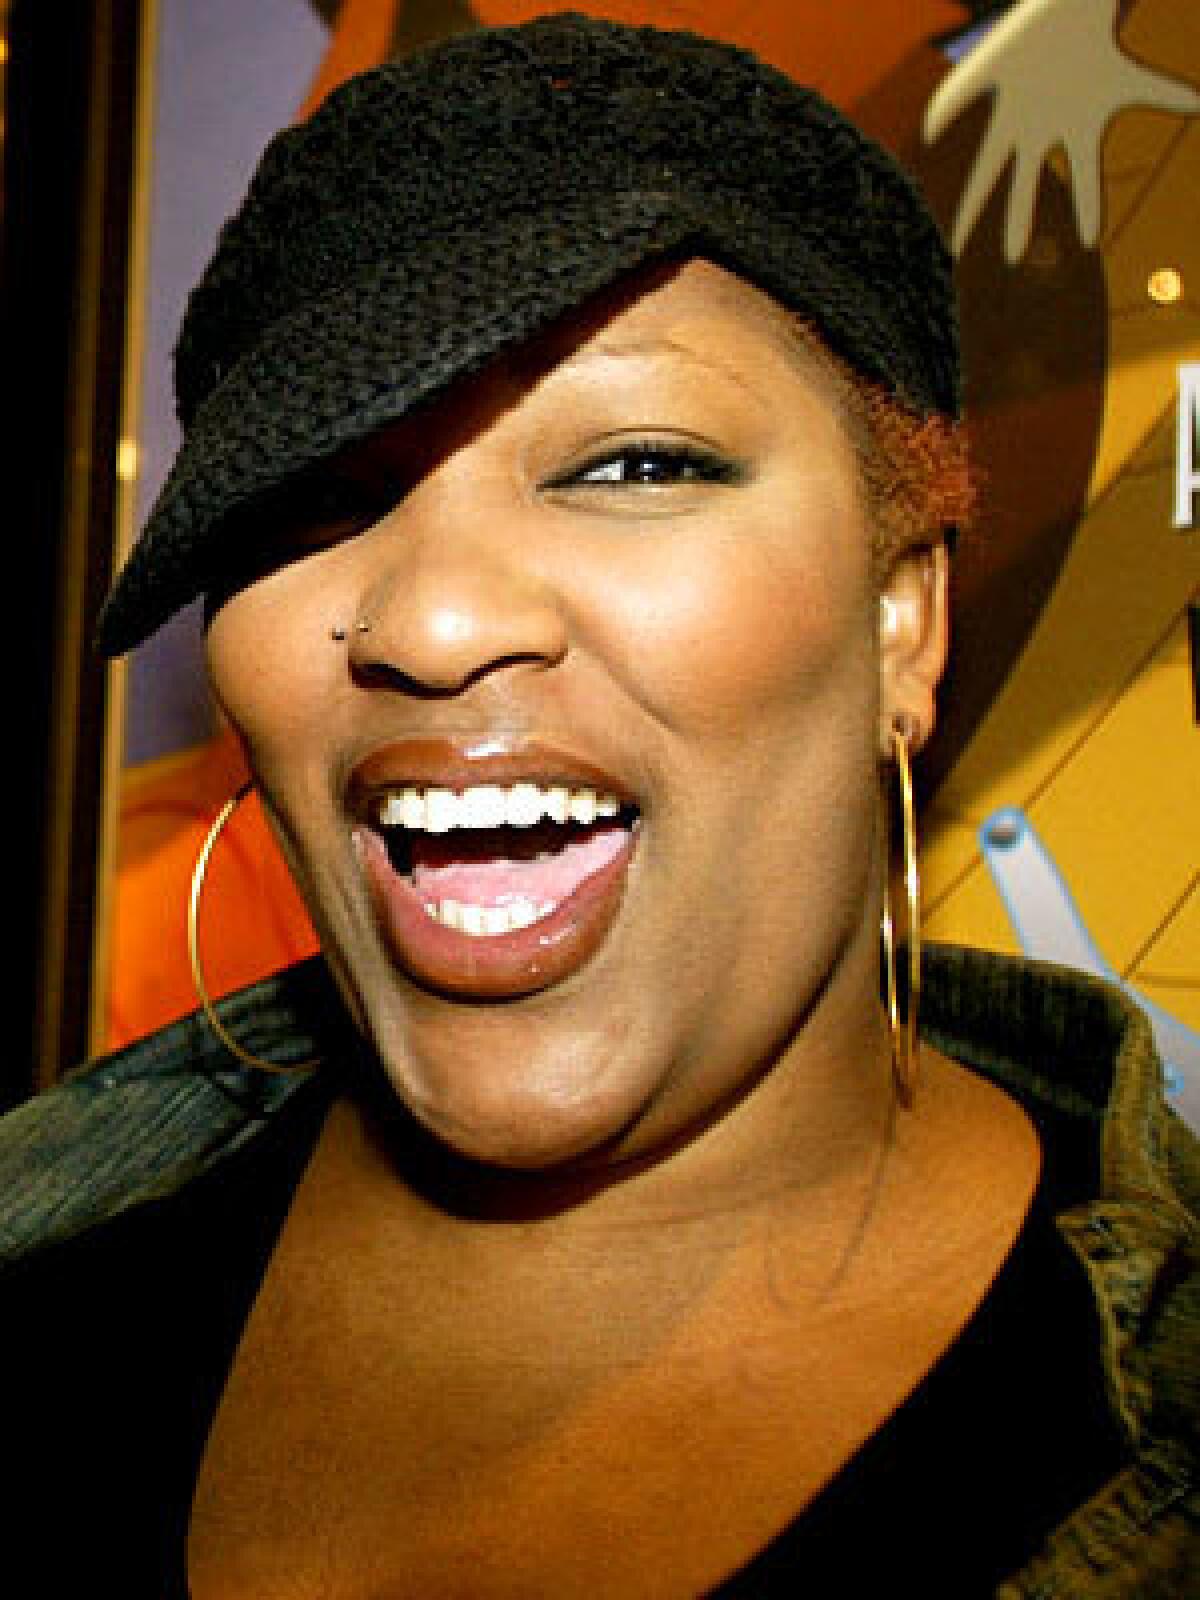 Frenchie Davis, the big-voiced "American Idol" contestant who found success on Broadway in "Rent," admits to being apprehensive over polyp removal surgery.